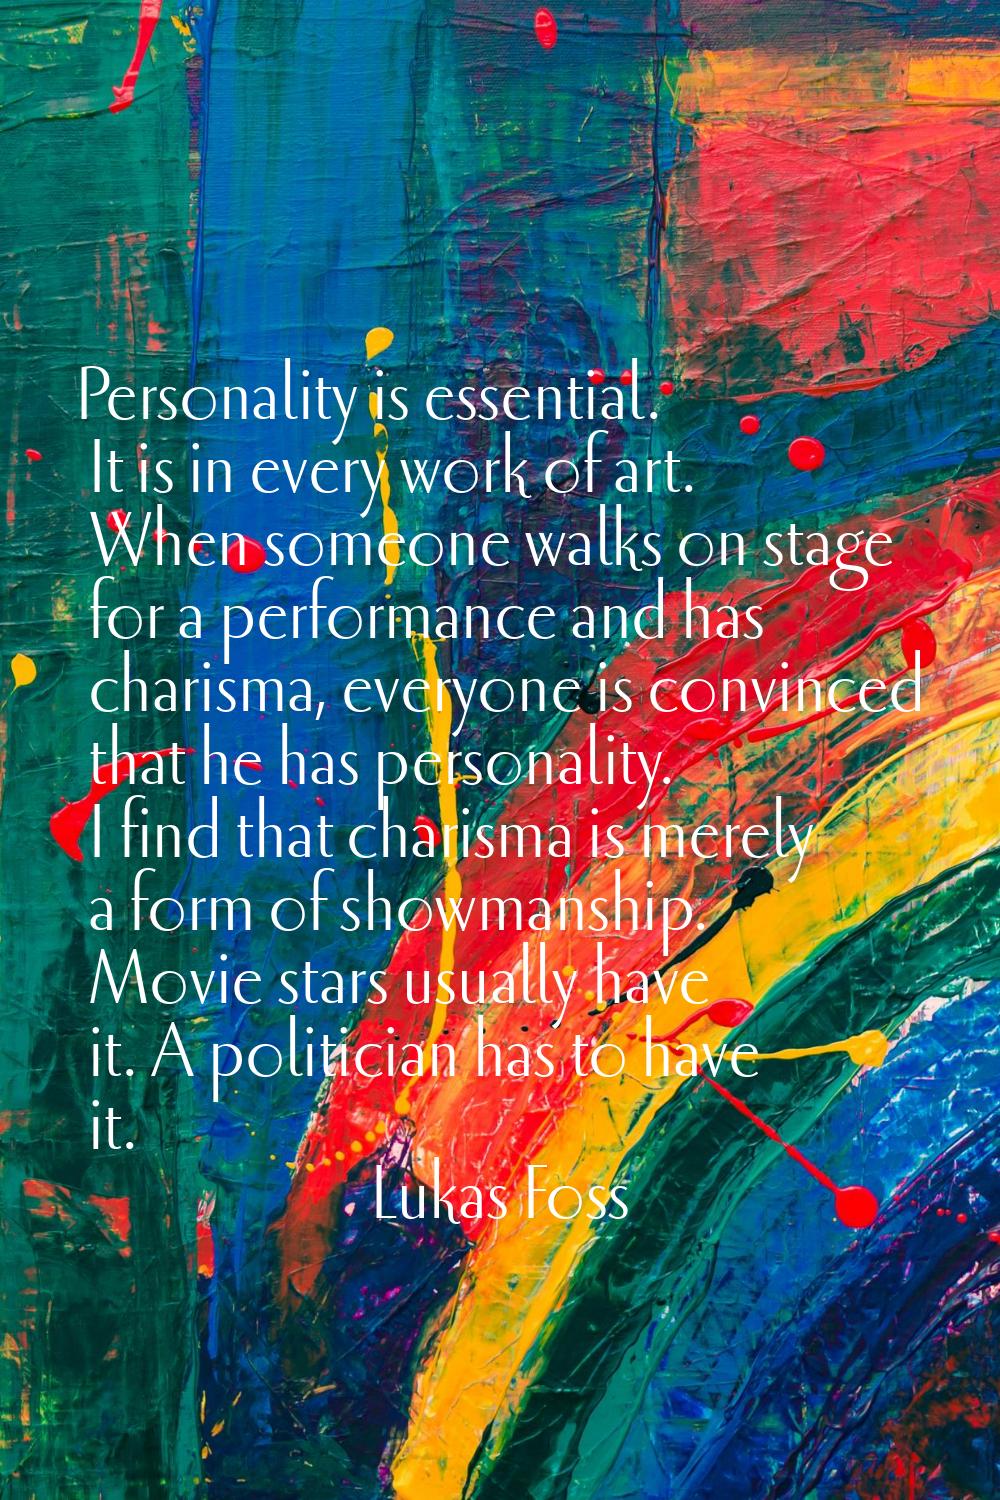 Personality is essential. It is in every work of art. When someone walks on stage for a performance